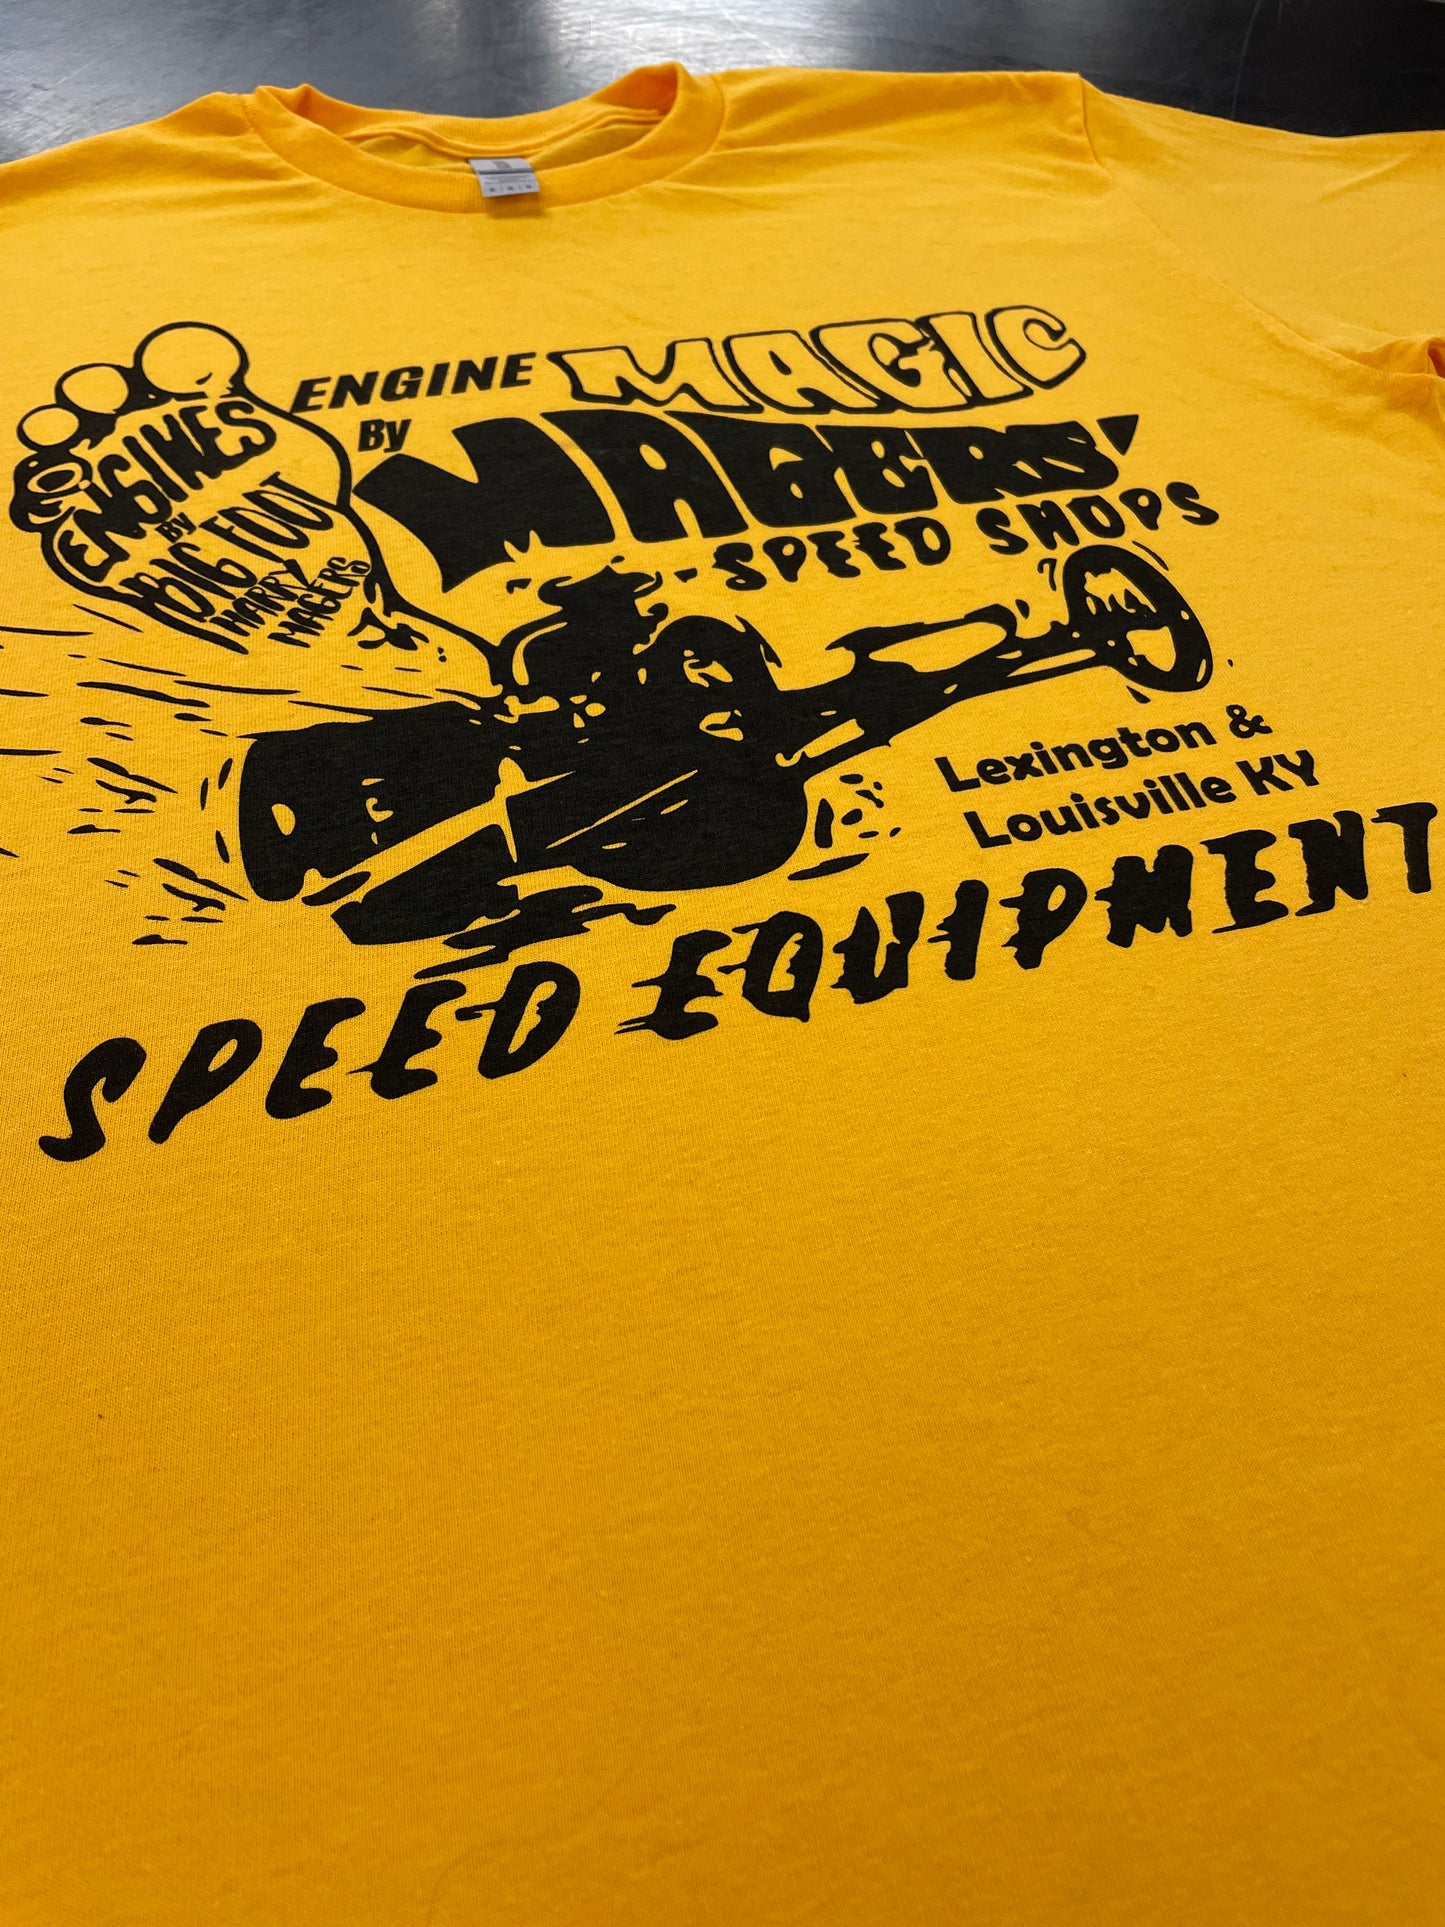 Magers' Speed Shop Shirt